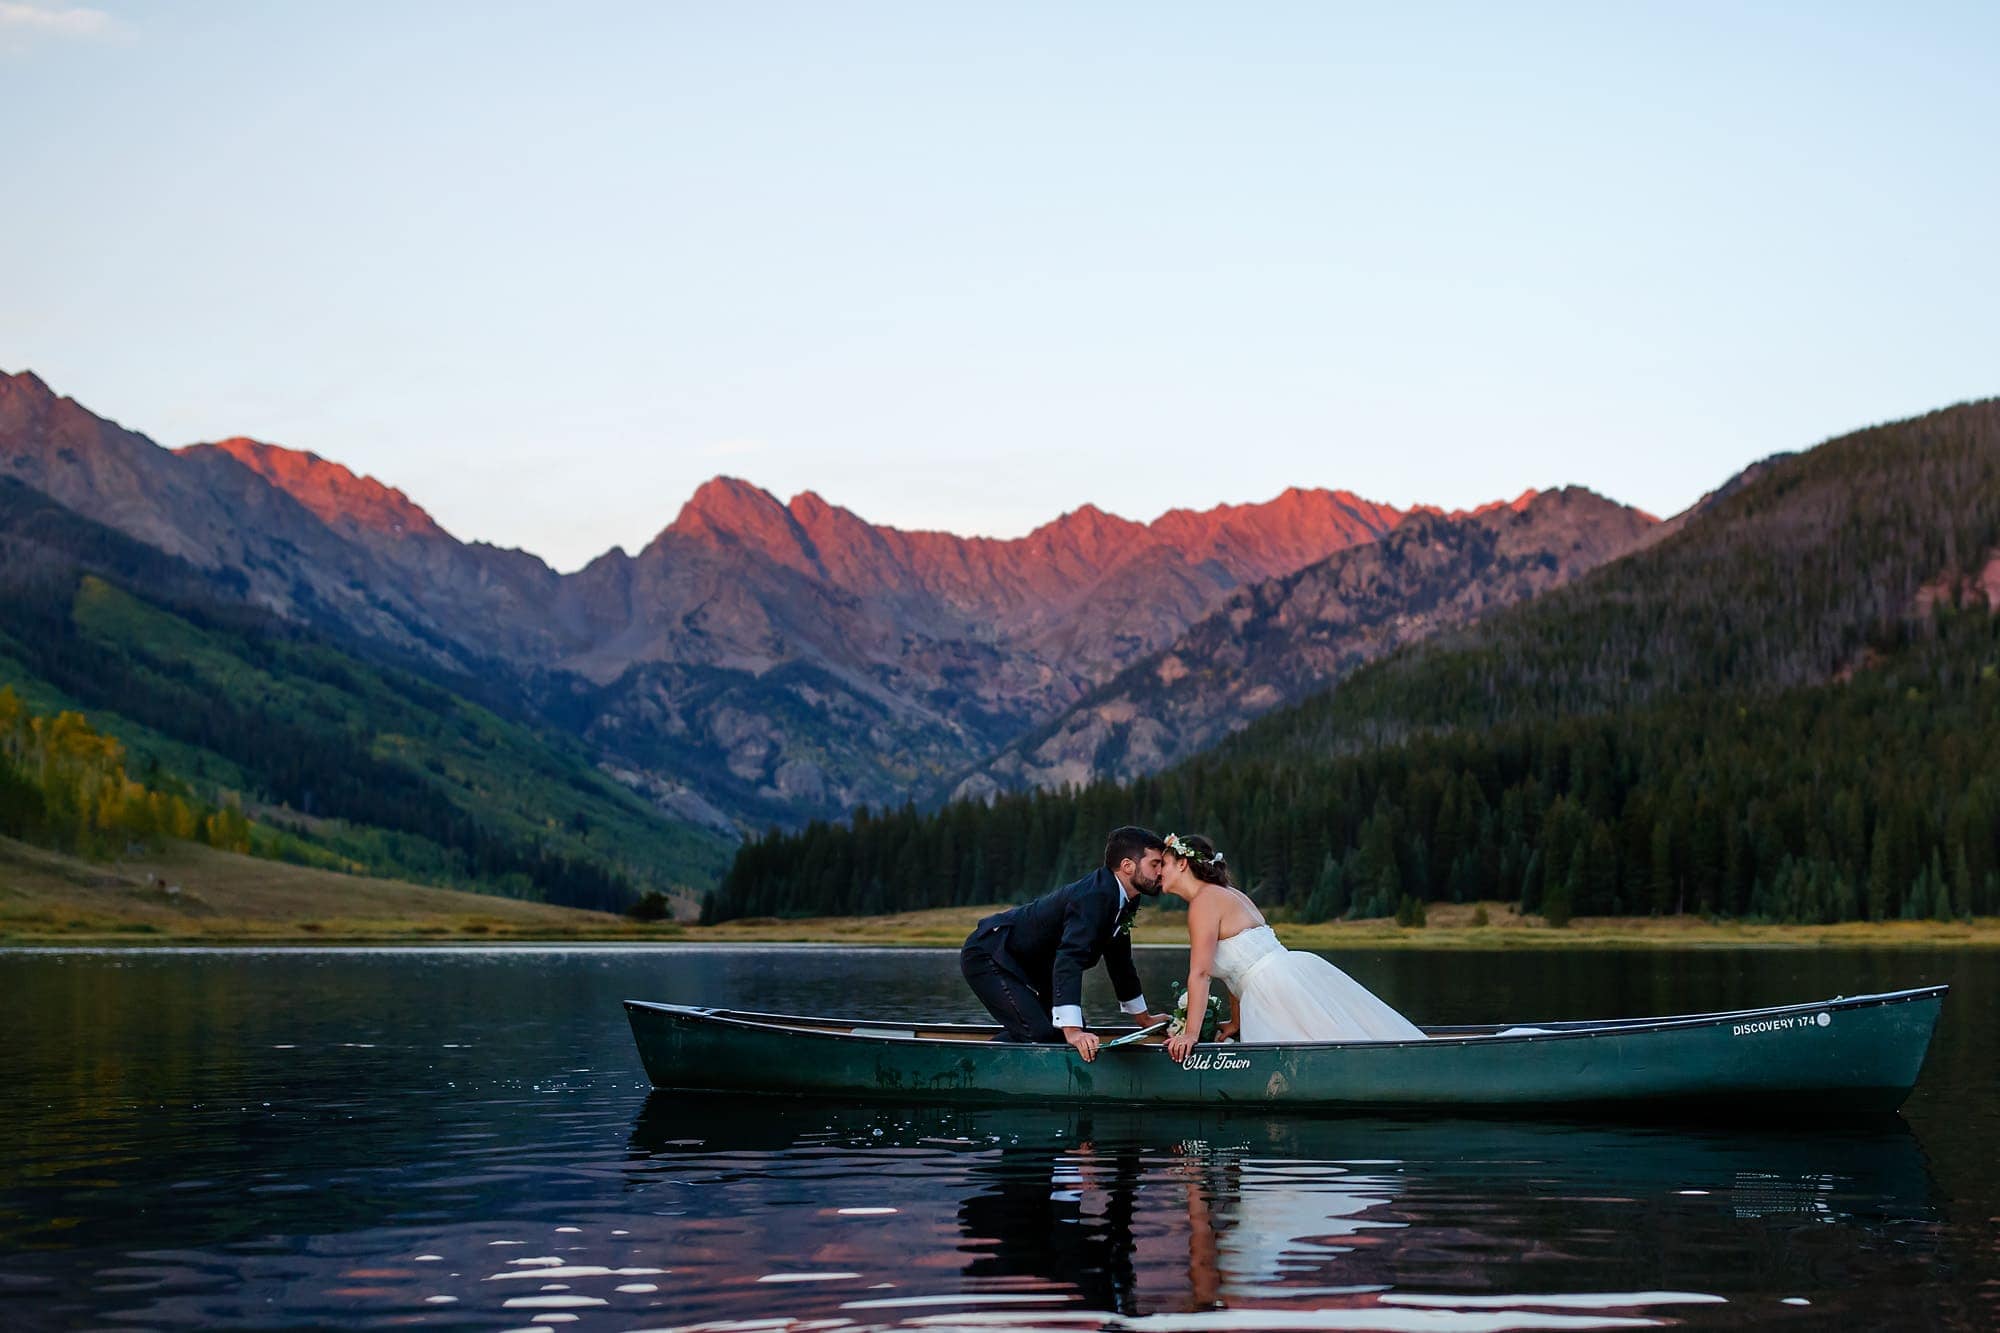 Becky and Brian share a kiss in a canoe on Piney lake as the Gore mountain range are lit by the evening sun during their September wedding.